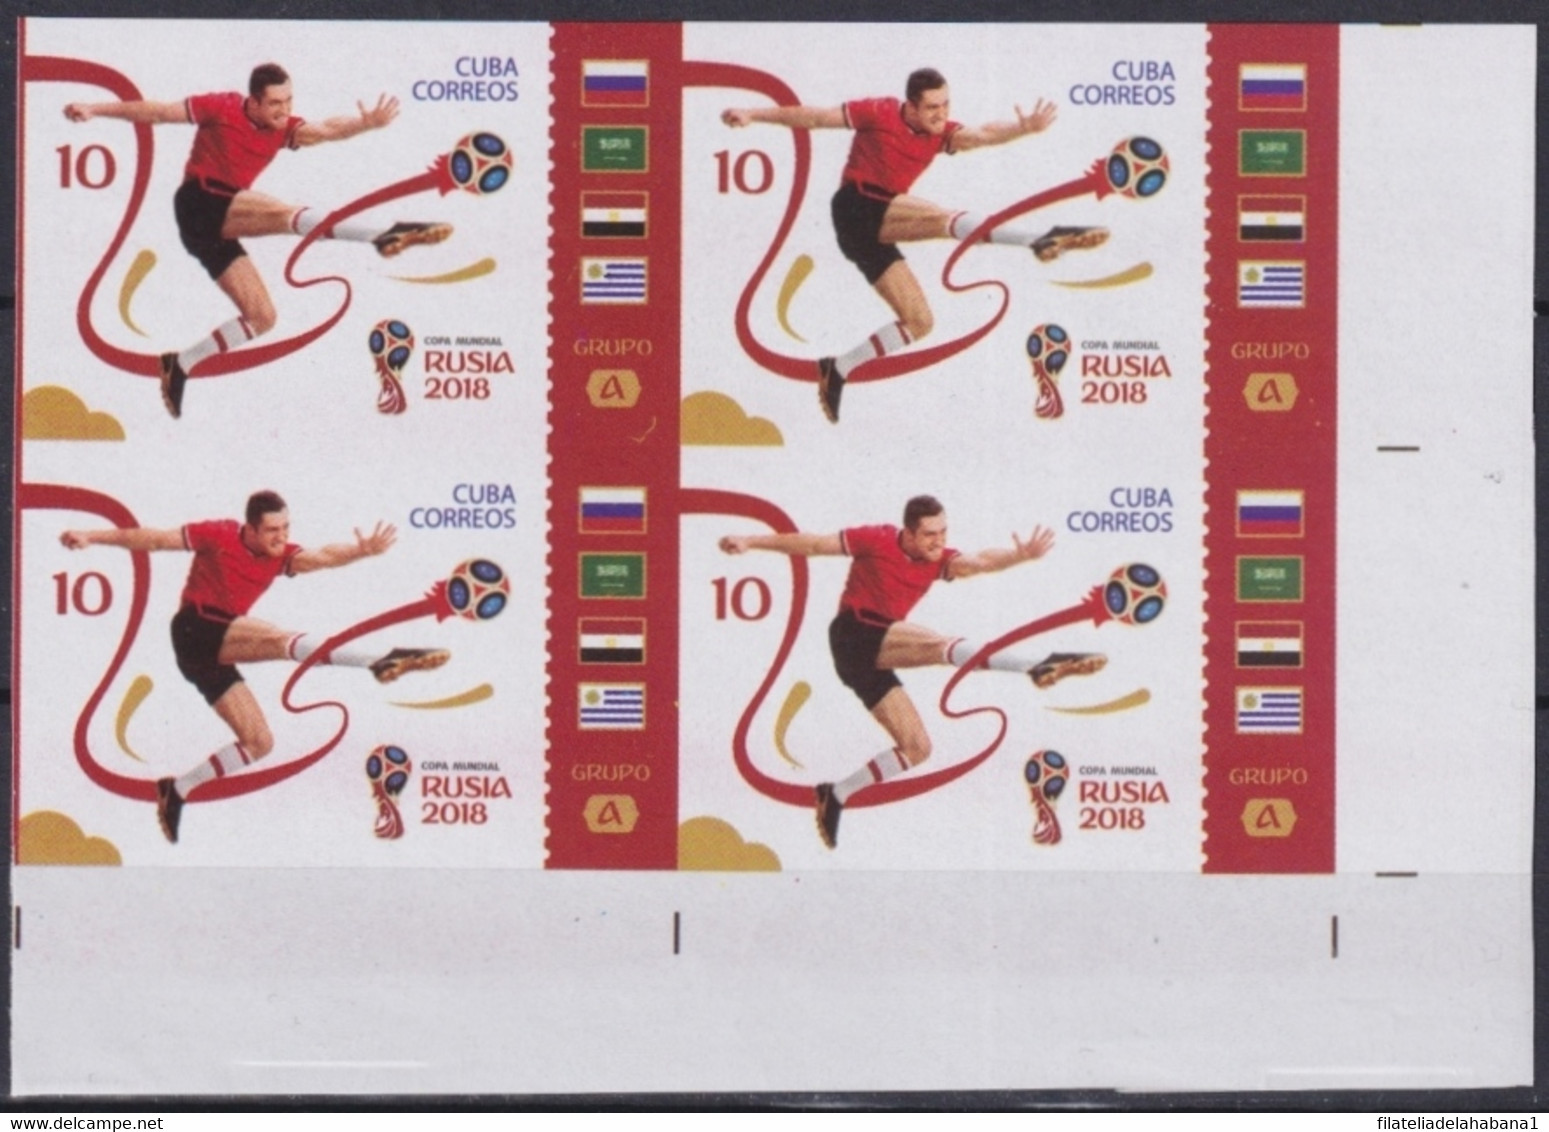 2018.212 CUBA MNH 2018 IMPERFORATED PROOF 10c RUSSIA WORLD SOCCER CHAMPIONSHIP. - Imperforates, Proofs & Errors